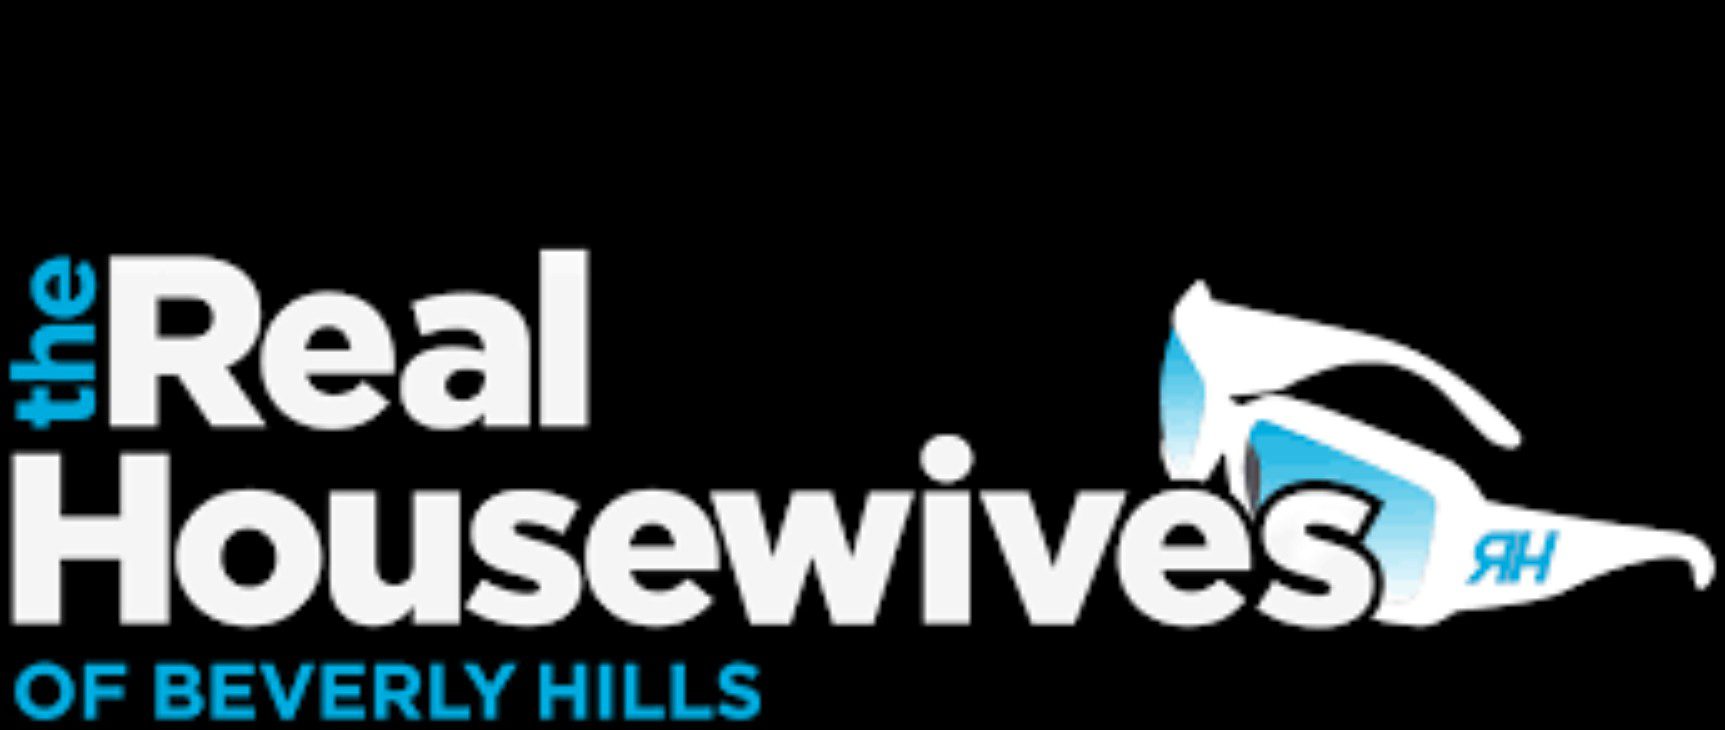 Poster of The Real Housewives of Beverly Hills